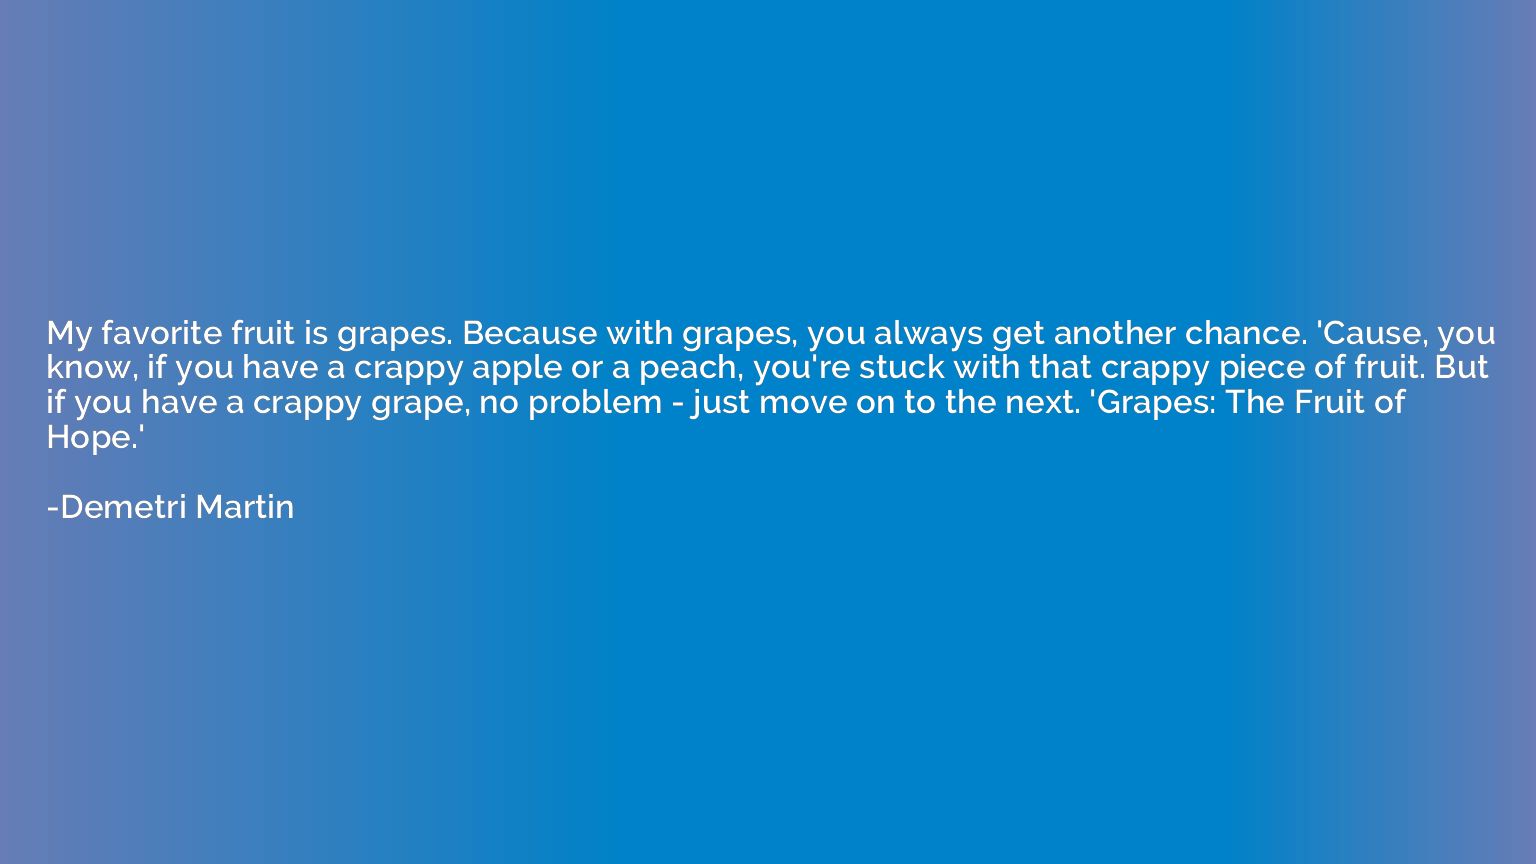 My favorite fruit is grapes. Because with grapes, you always